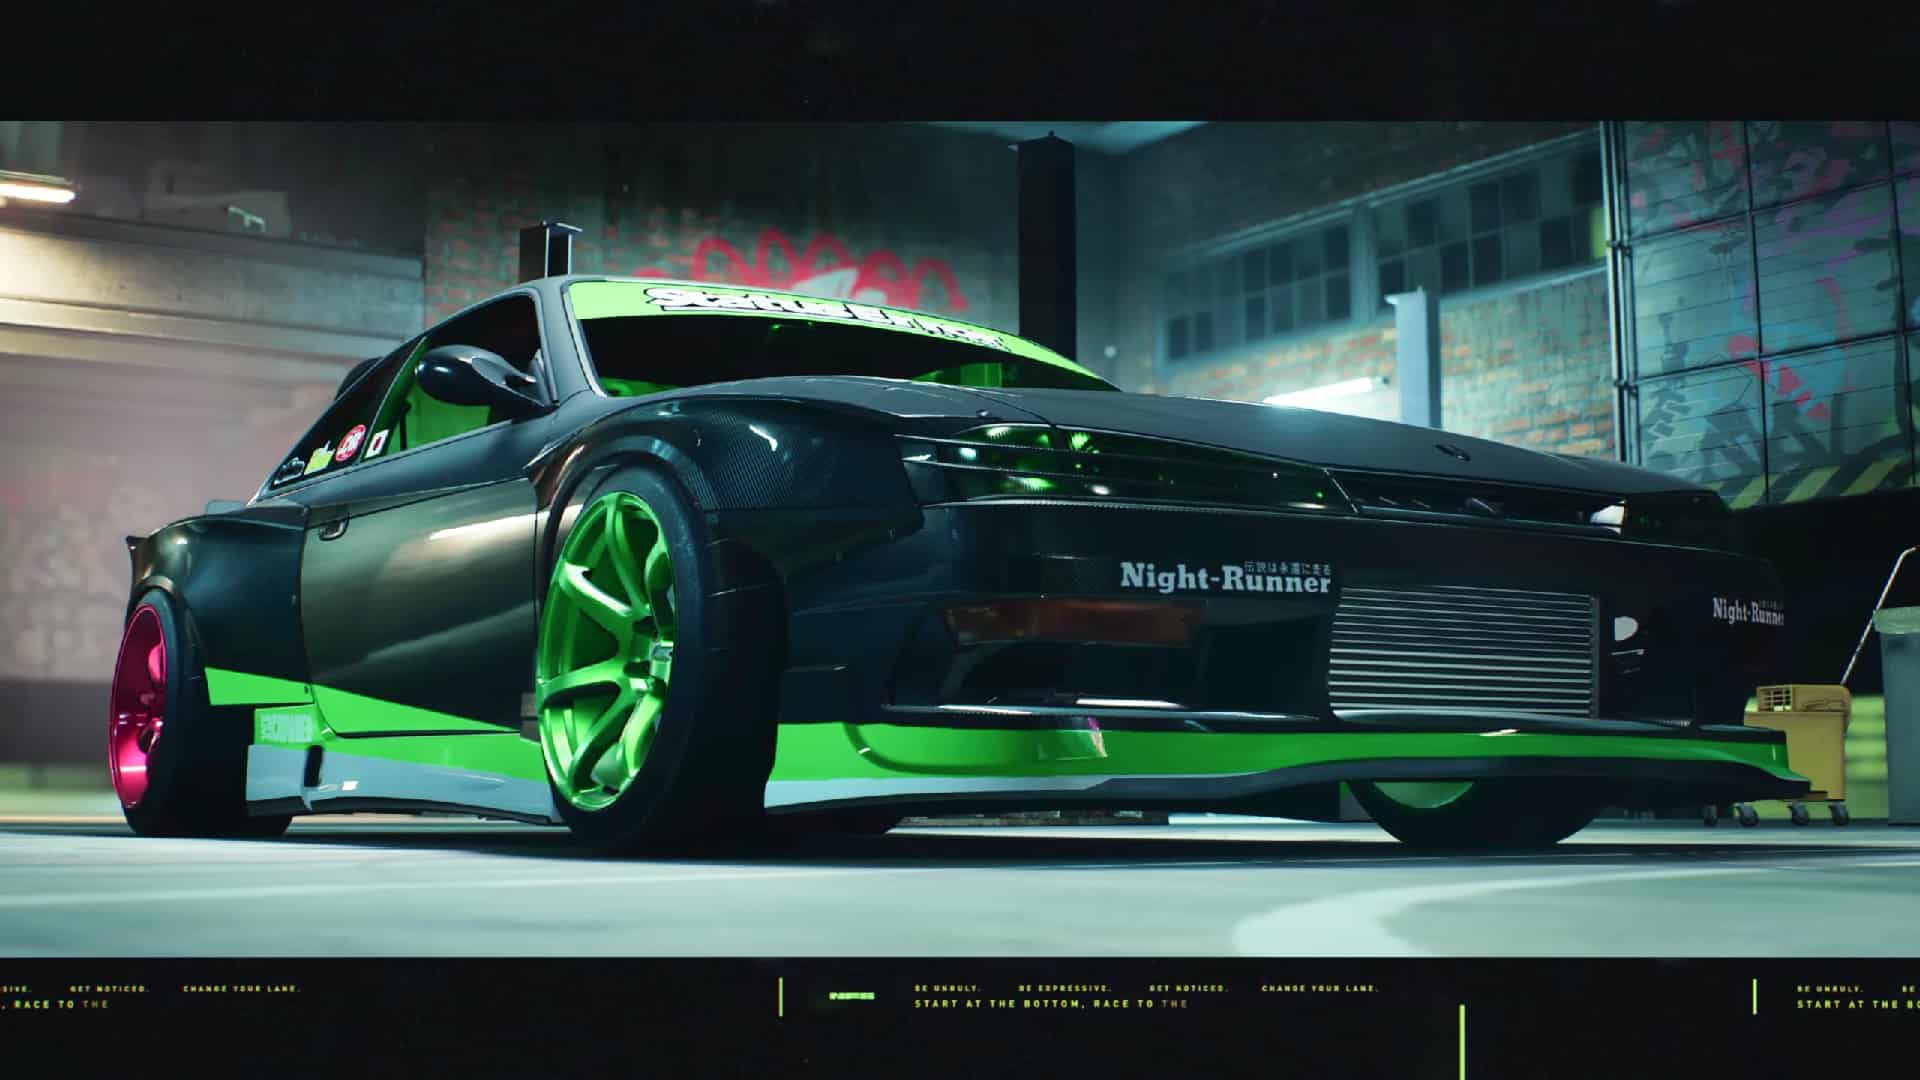 Every Car That Will Be In Need For Speed Unbound